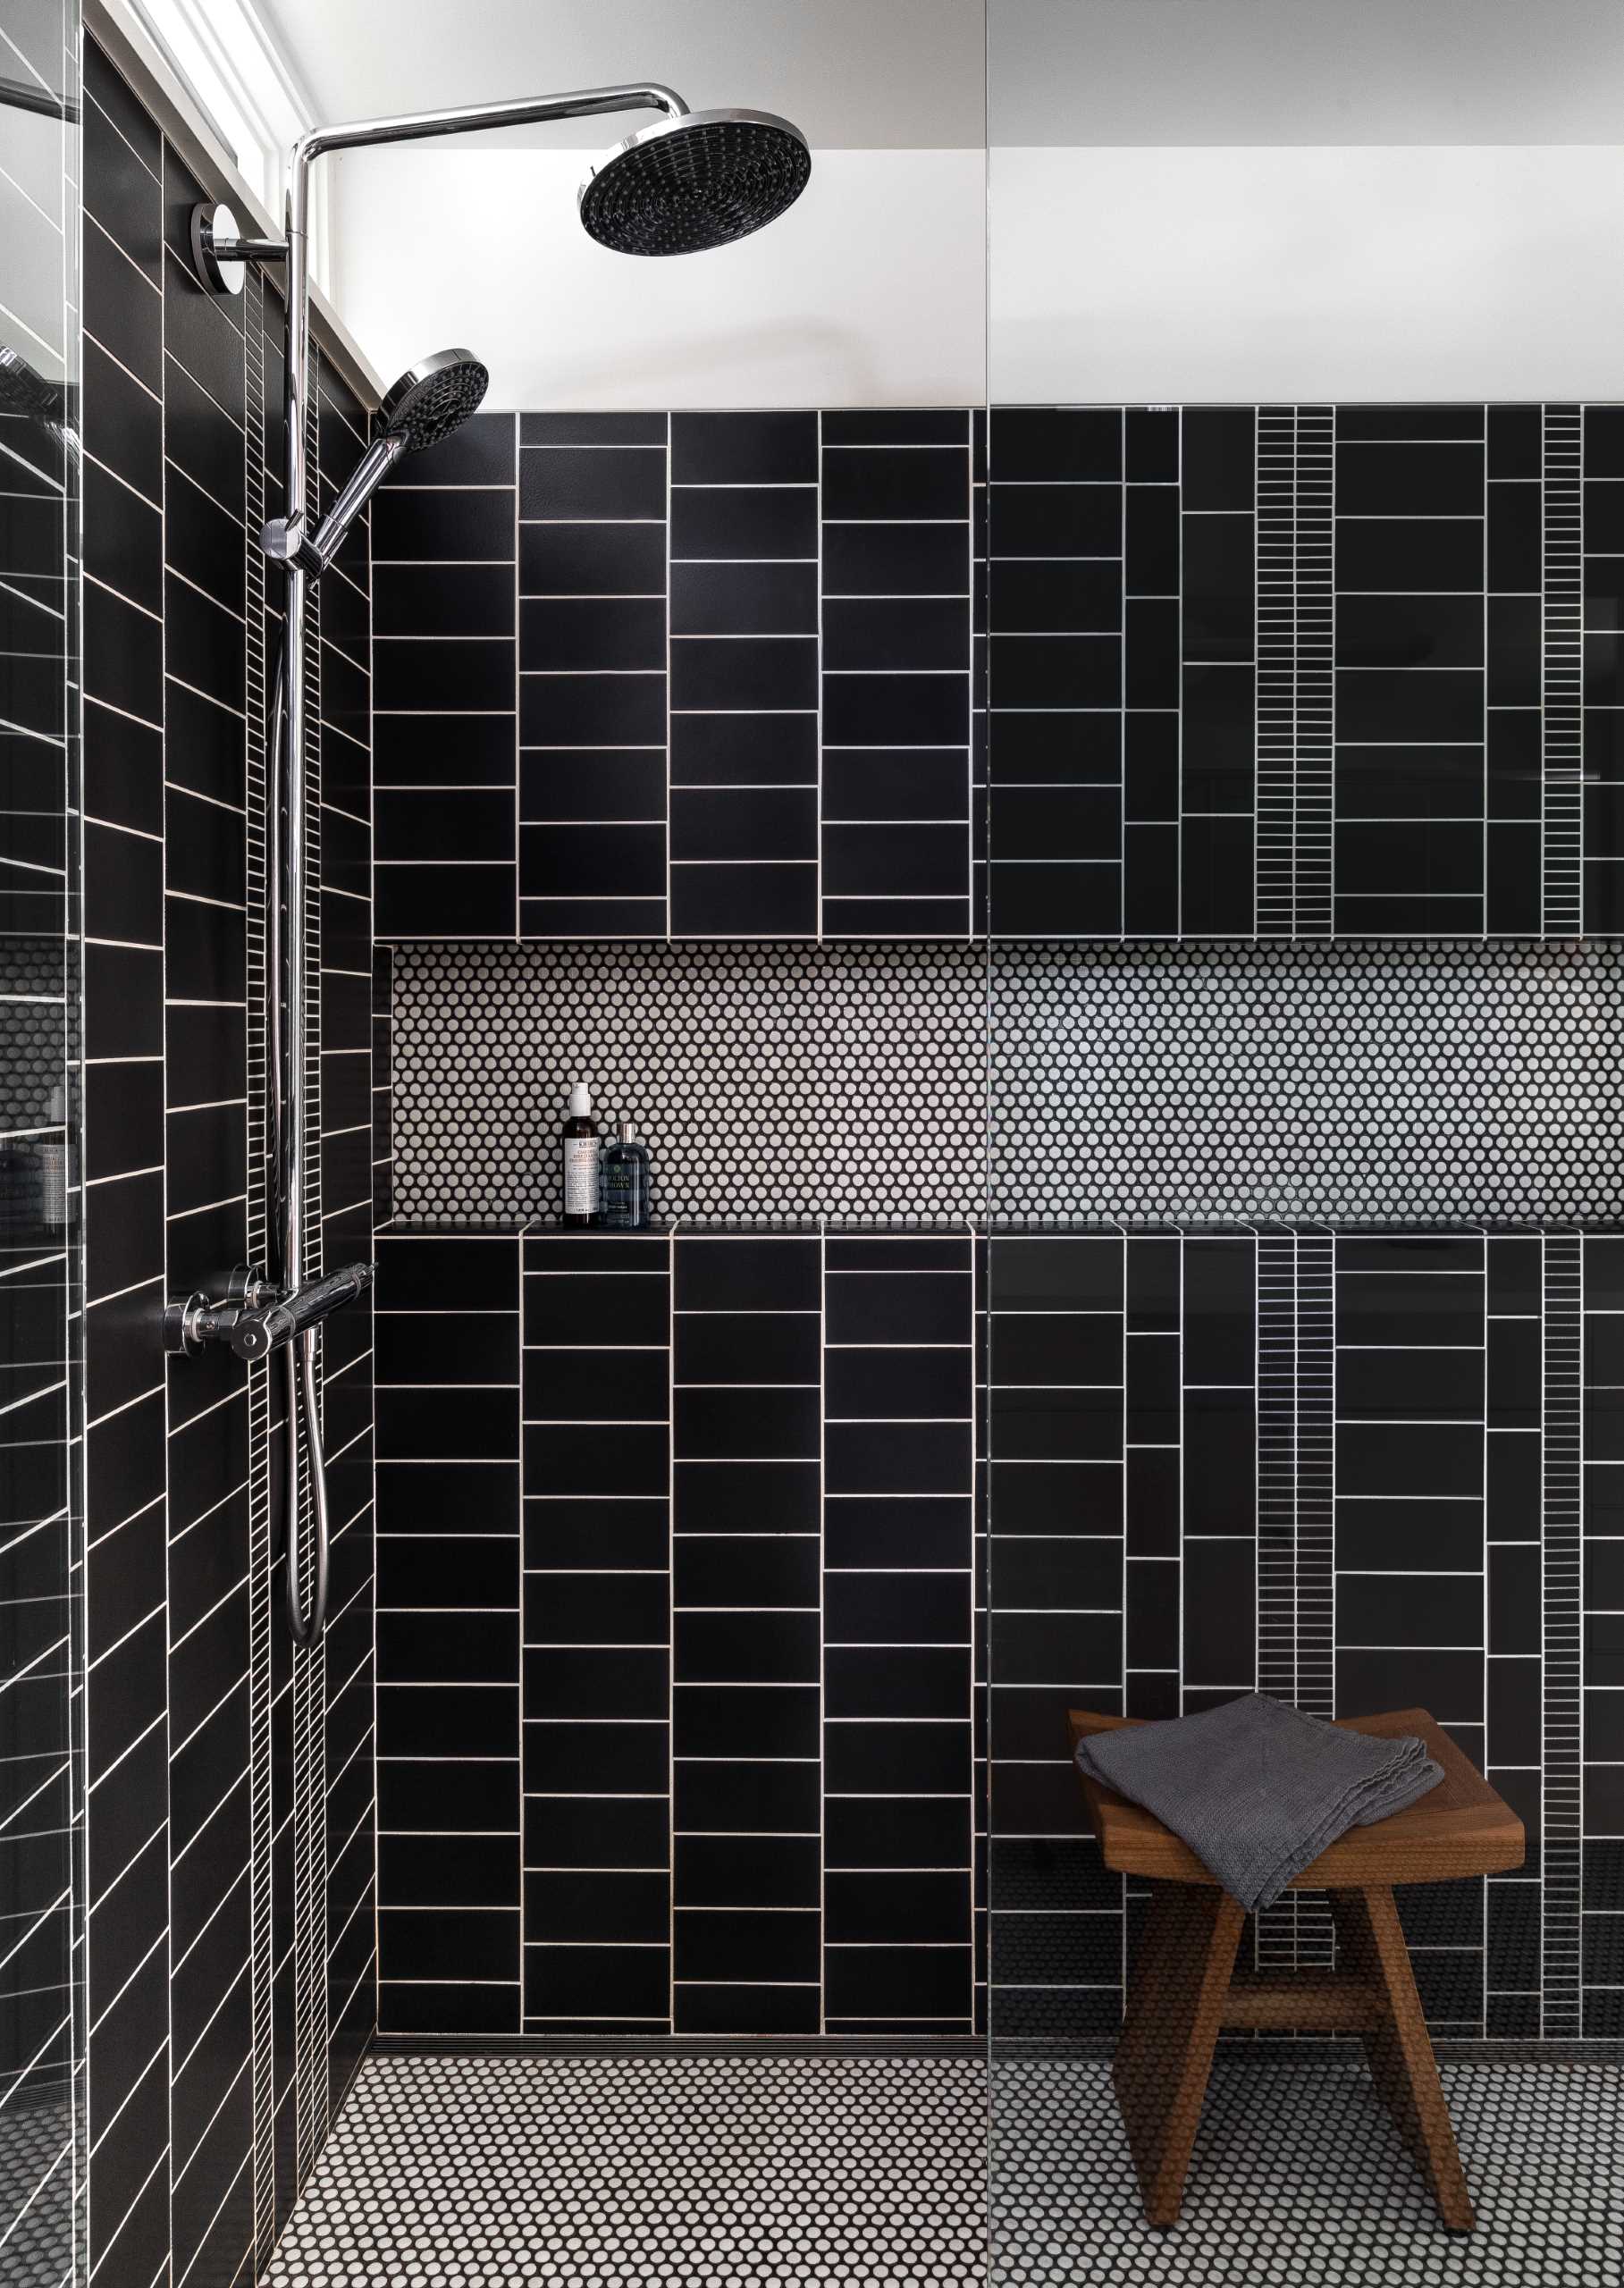 In this modern bathroom, black and white tiles have been c،sen to line the s،wer, with contrasting grout allowing each tile shape to stand out.